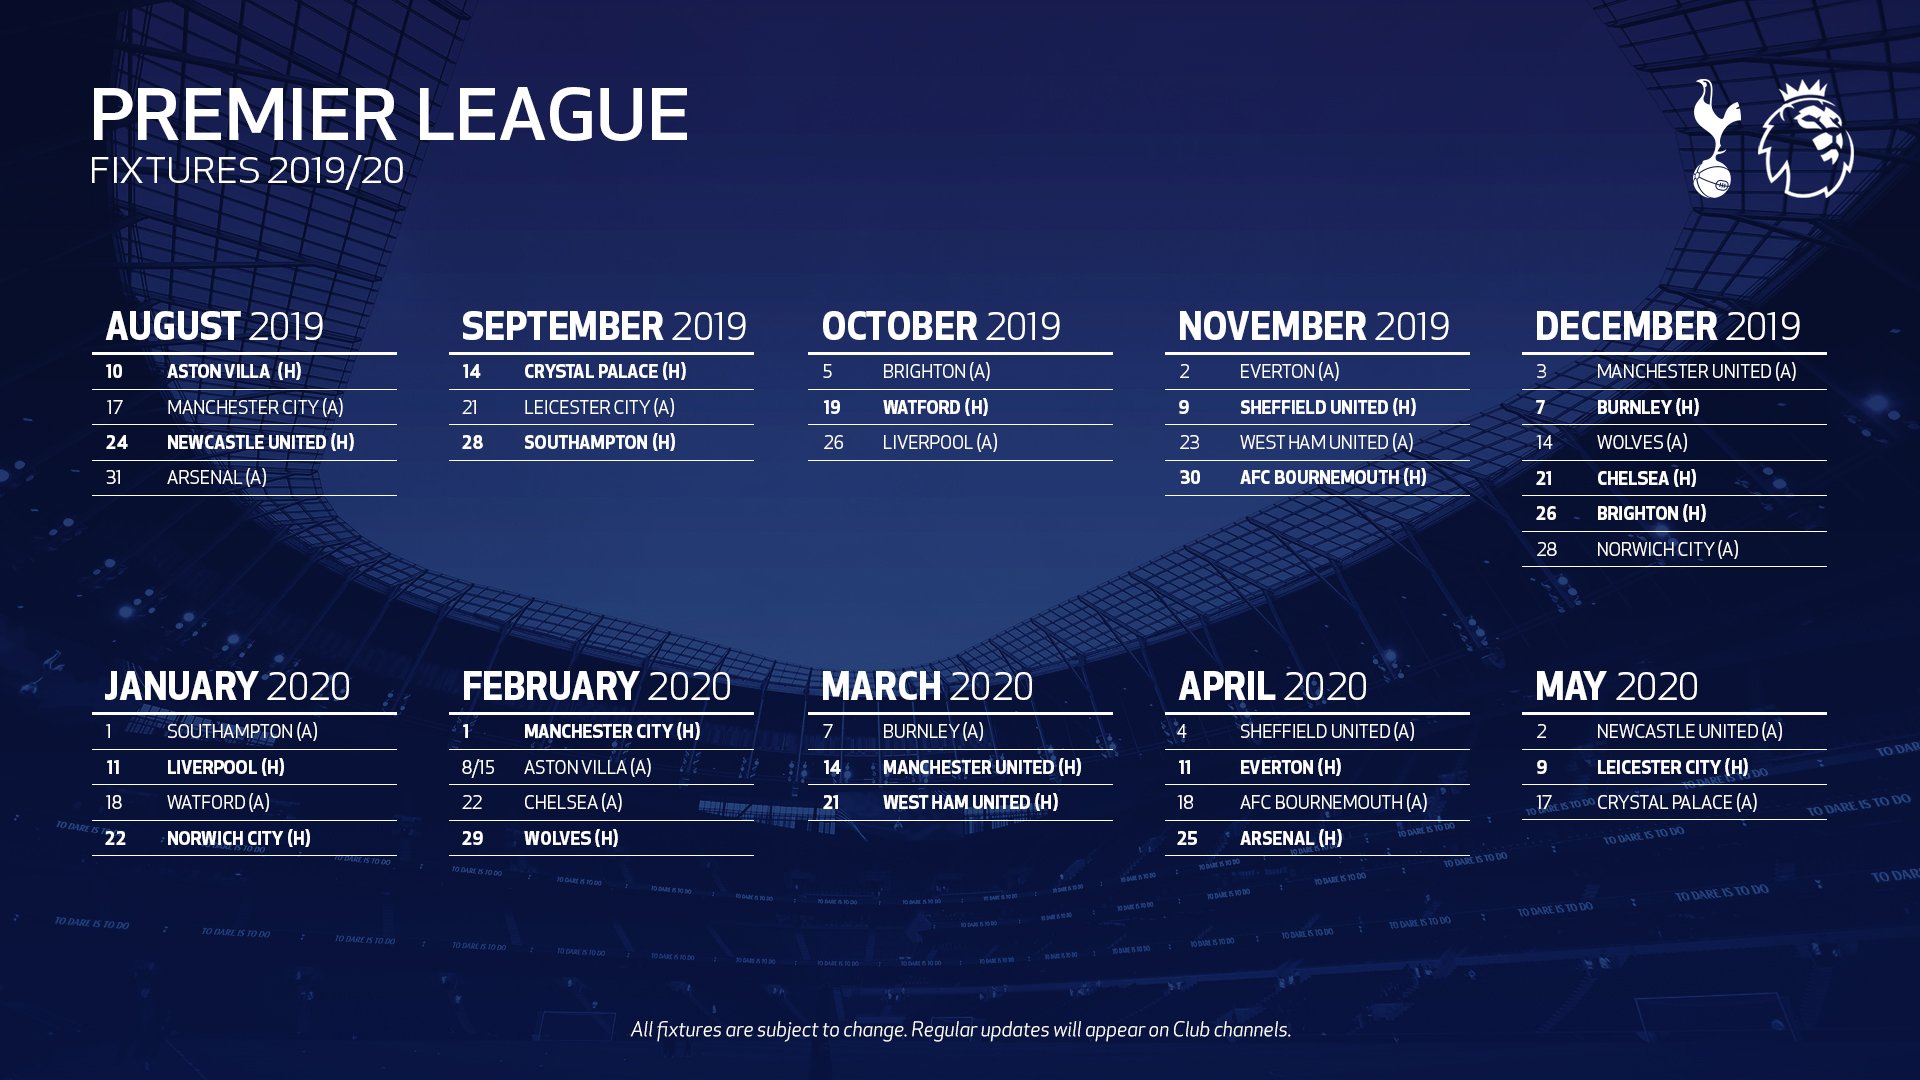 Tottenham Hotspur 2019/20 season preview guide: Full fixture list, latest  betting odds and Spurs transfer news for Premier League team's campaign